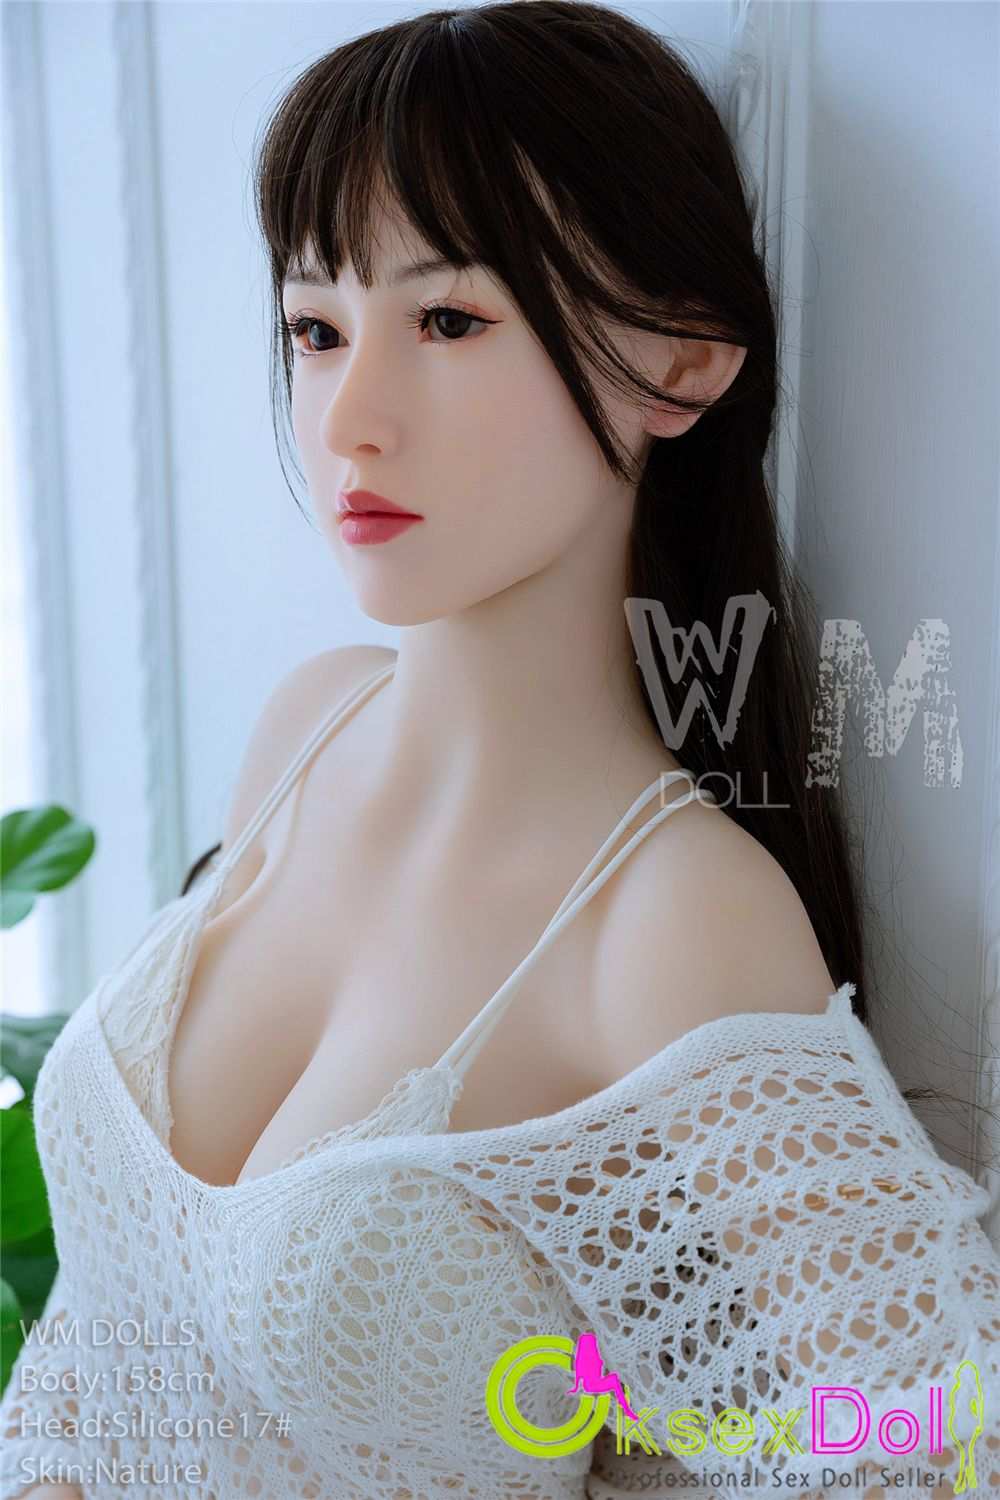 WM doll Images